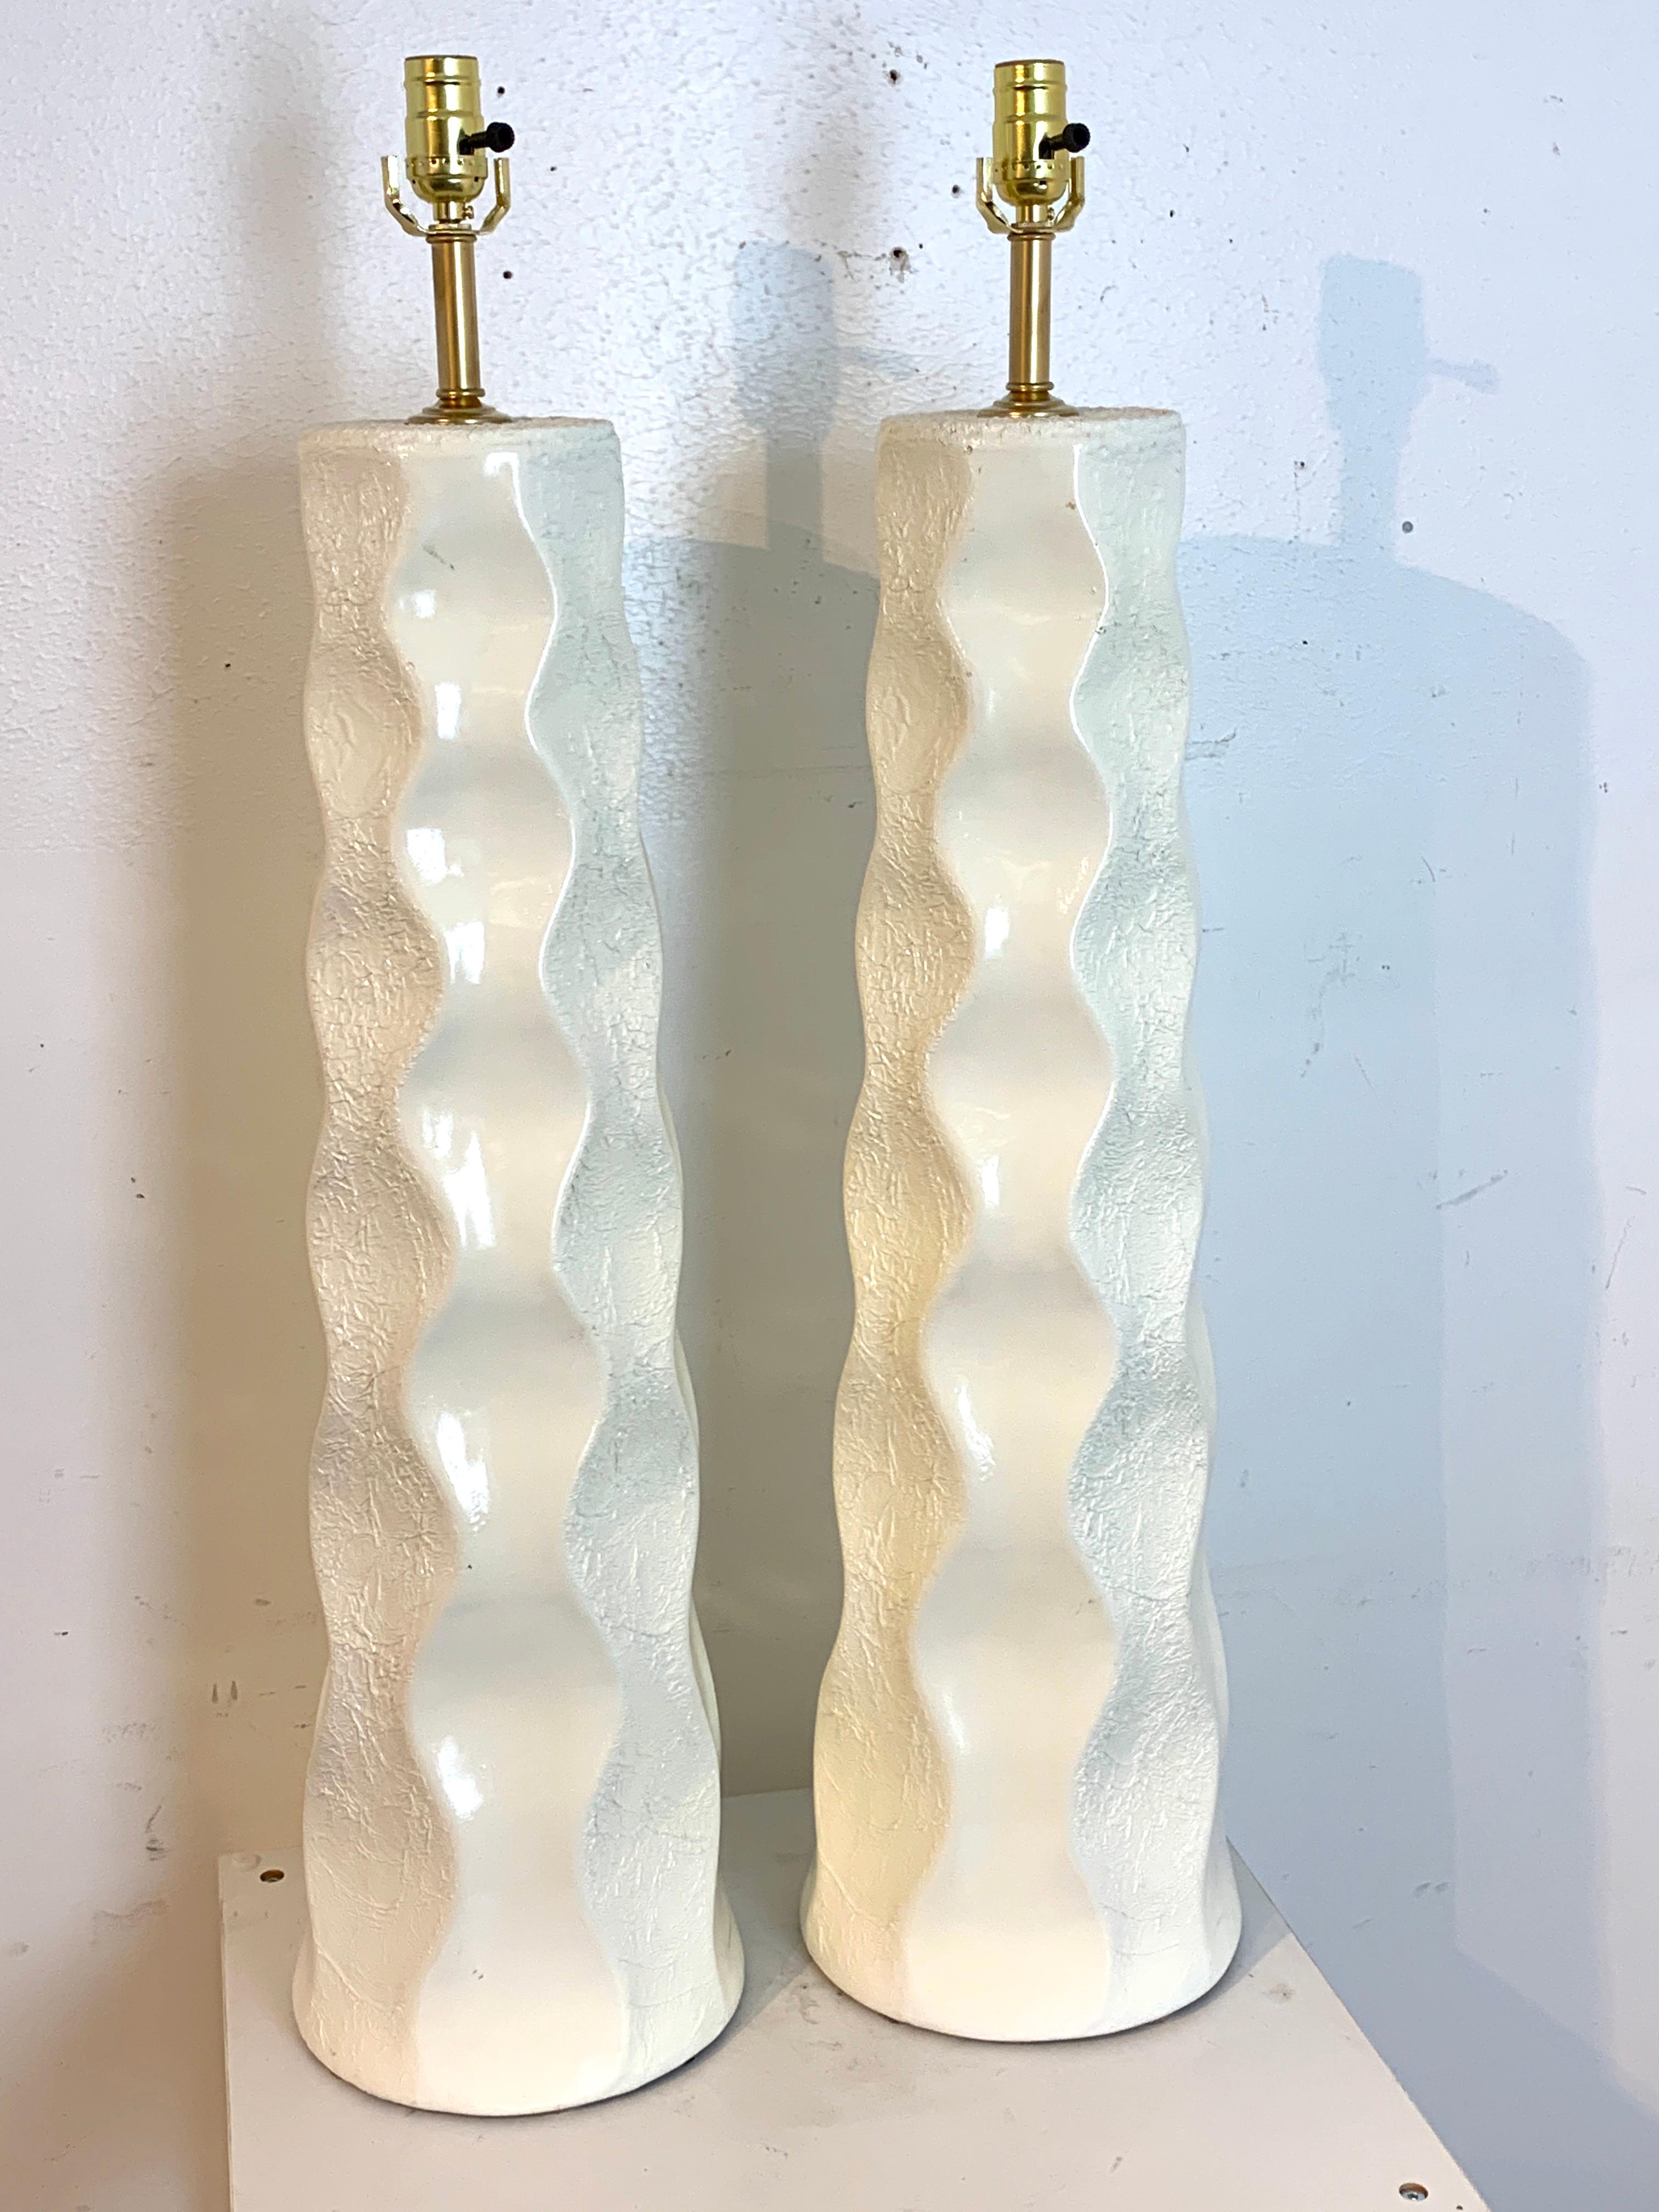 Large pair of Mid-Century Modern undulating textured column lamps, in white, each one a sculpture with alternating undulating lines.
Each lamp stands 31